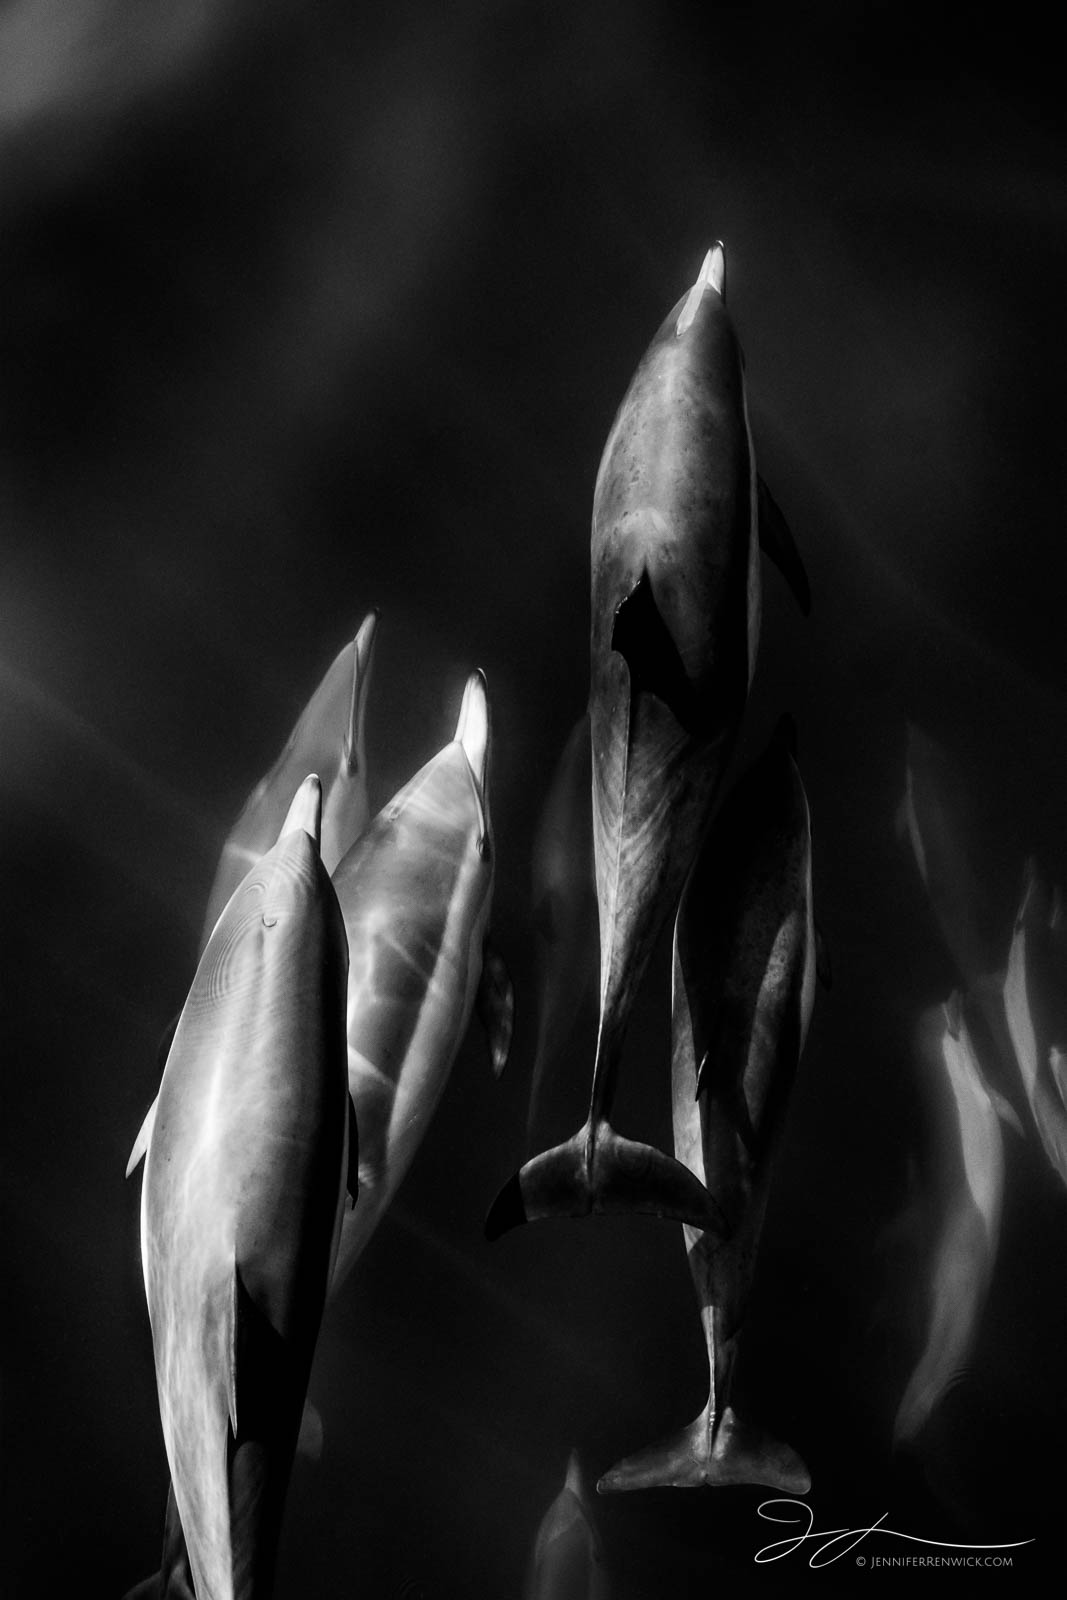 A pod of wild common dolphins swims in a group through the sunlit ocean. This image is part of my "A Morning With Dolphins" photo...